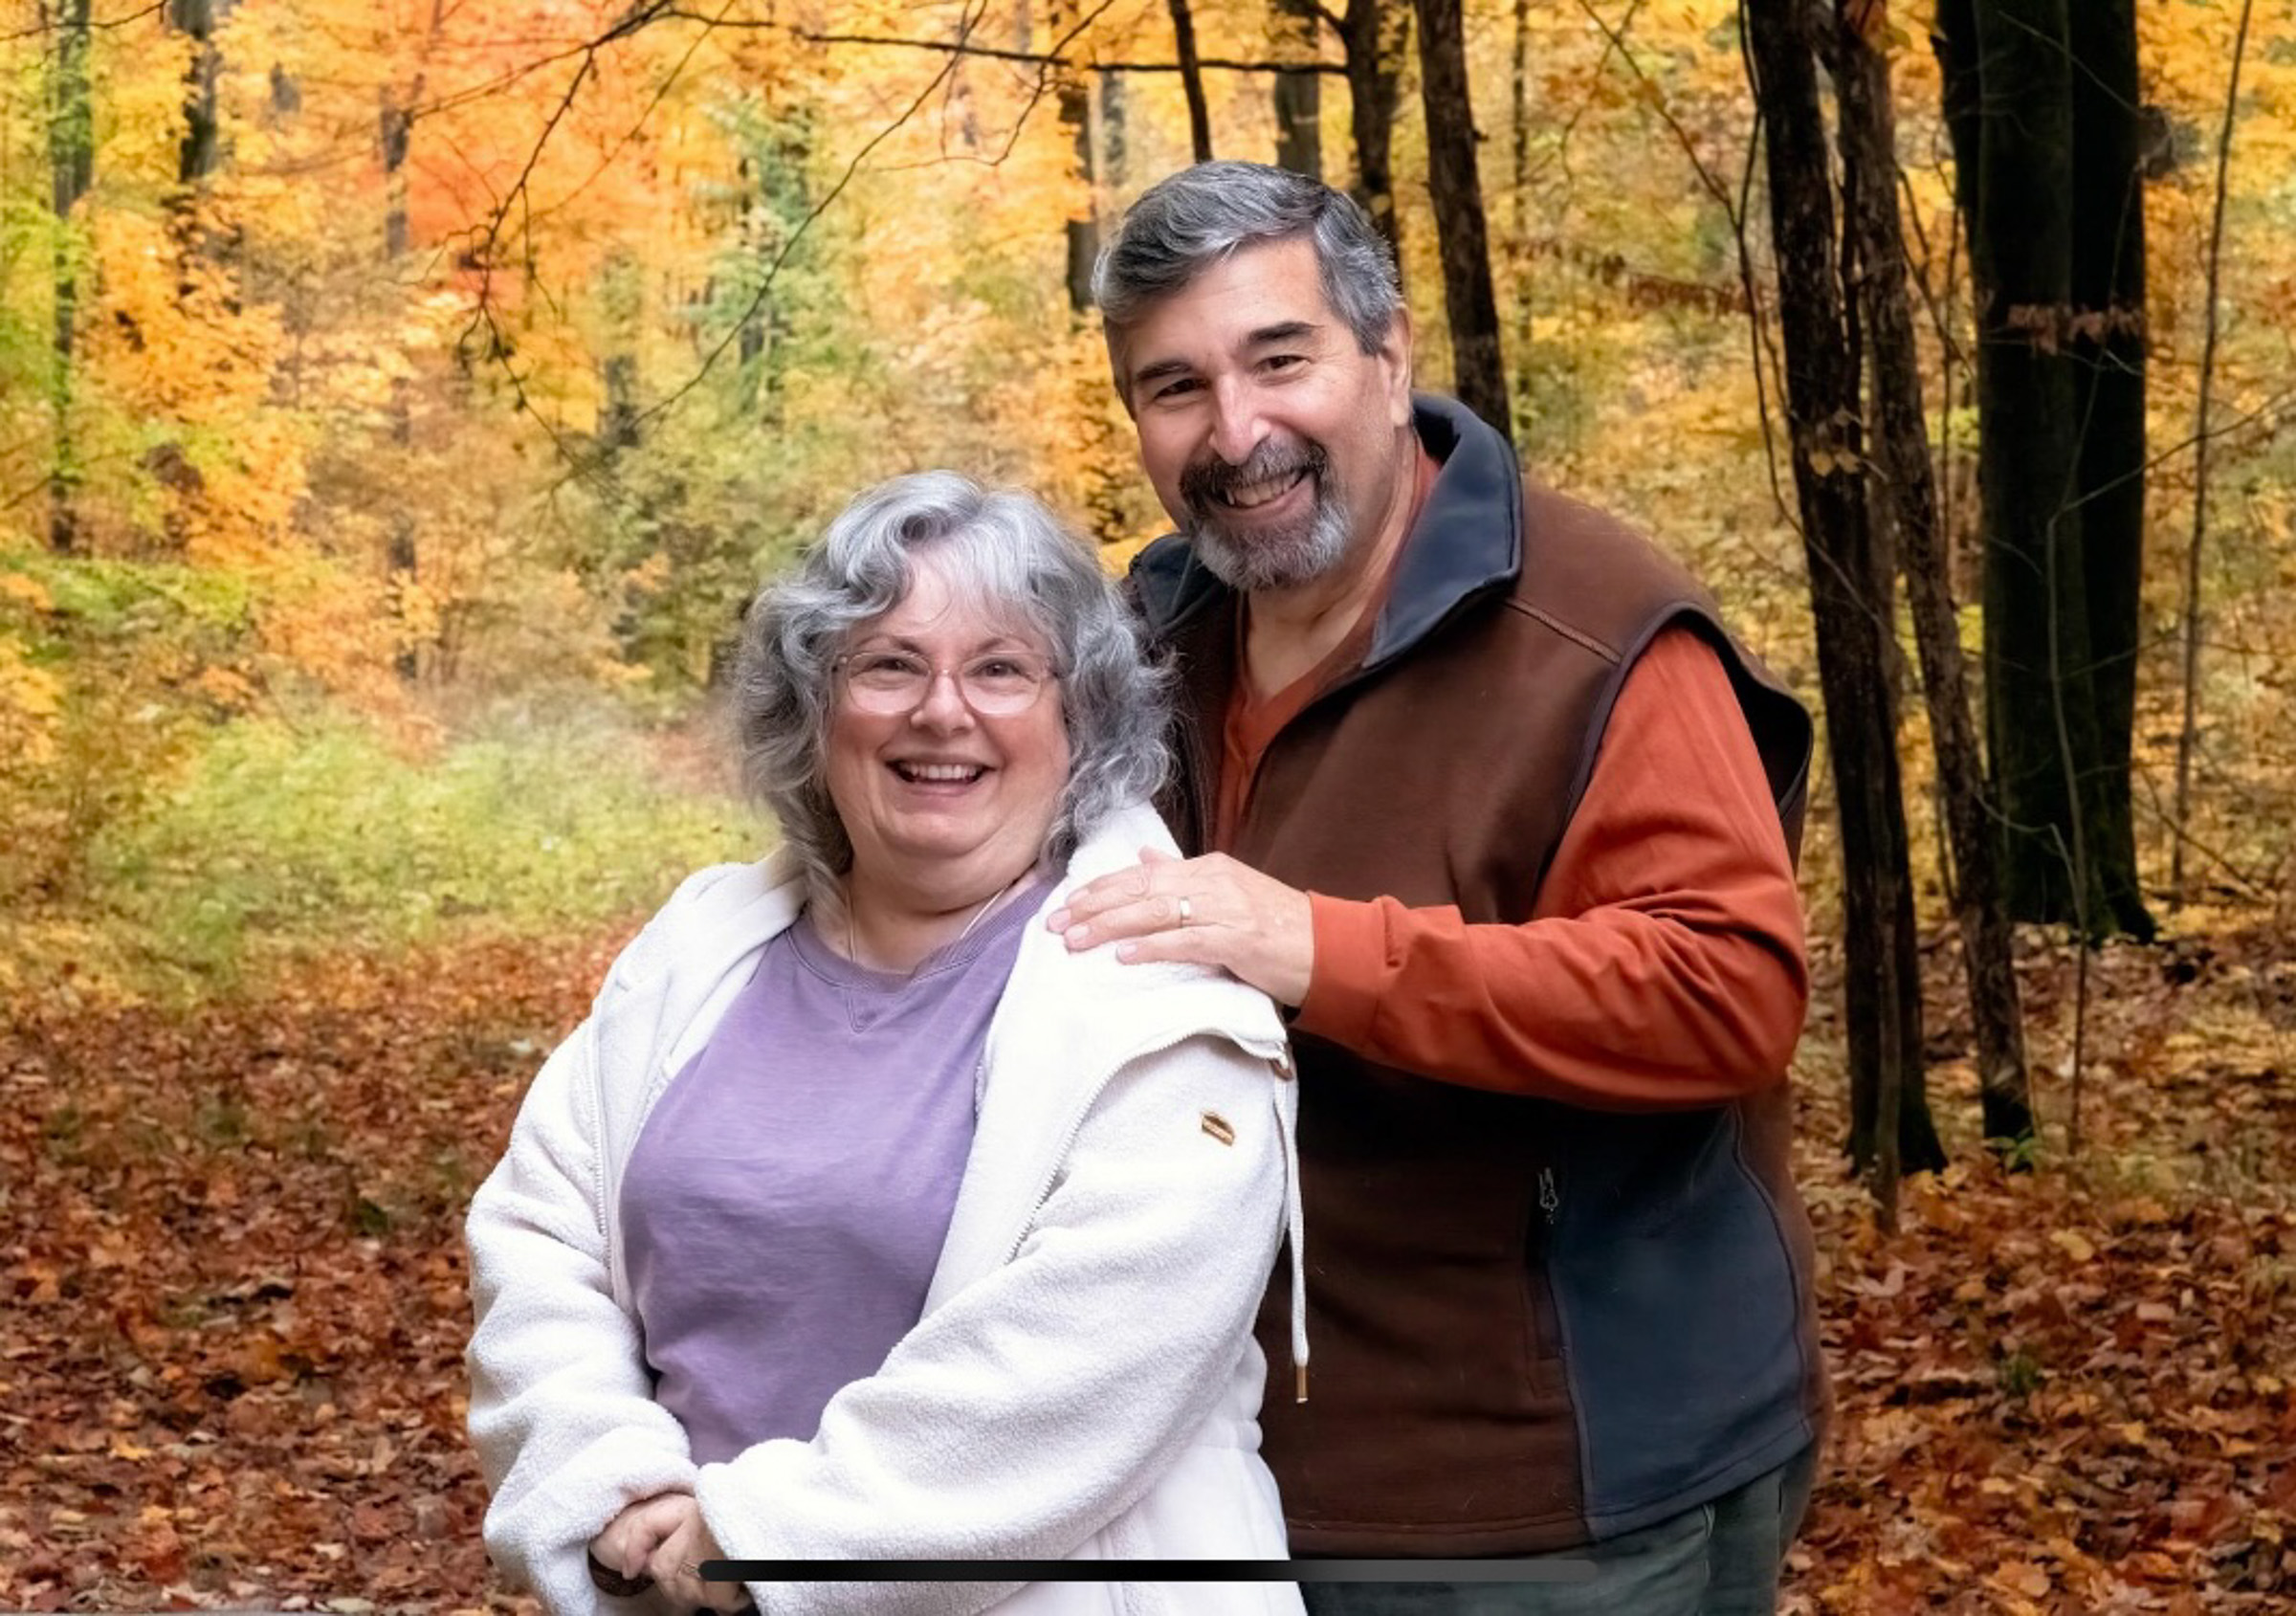 Dennis and Lorna Kurtjian pose for a family portrait on a fall day